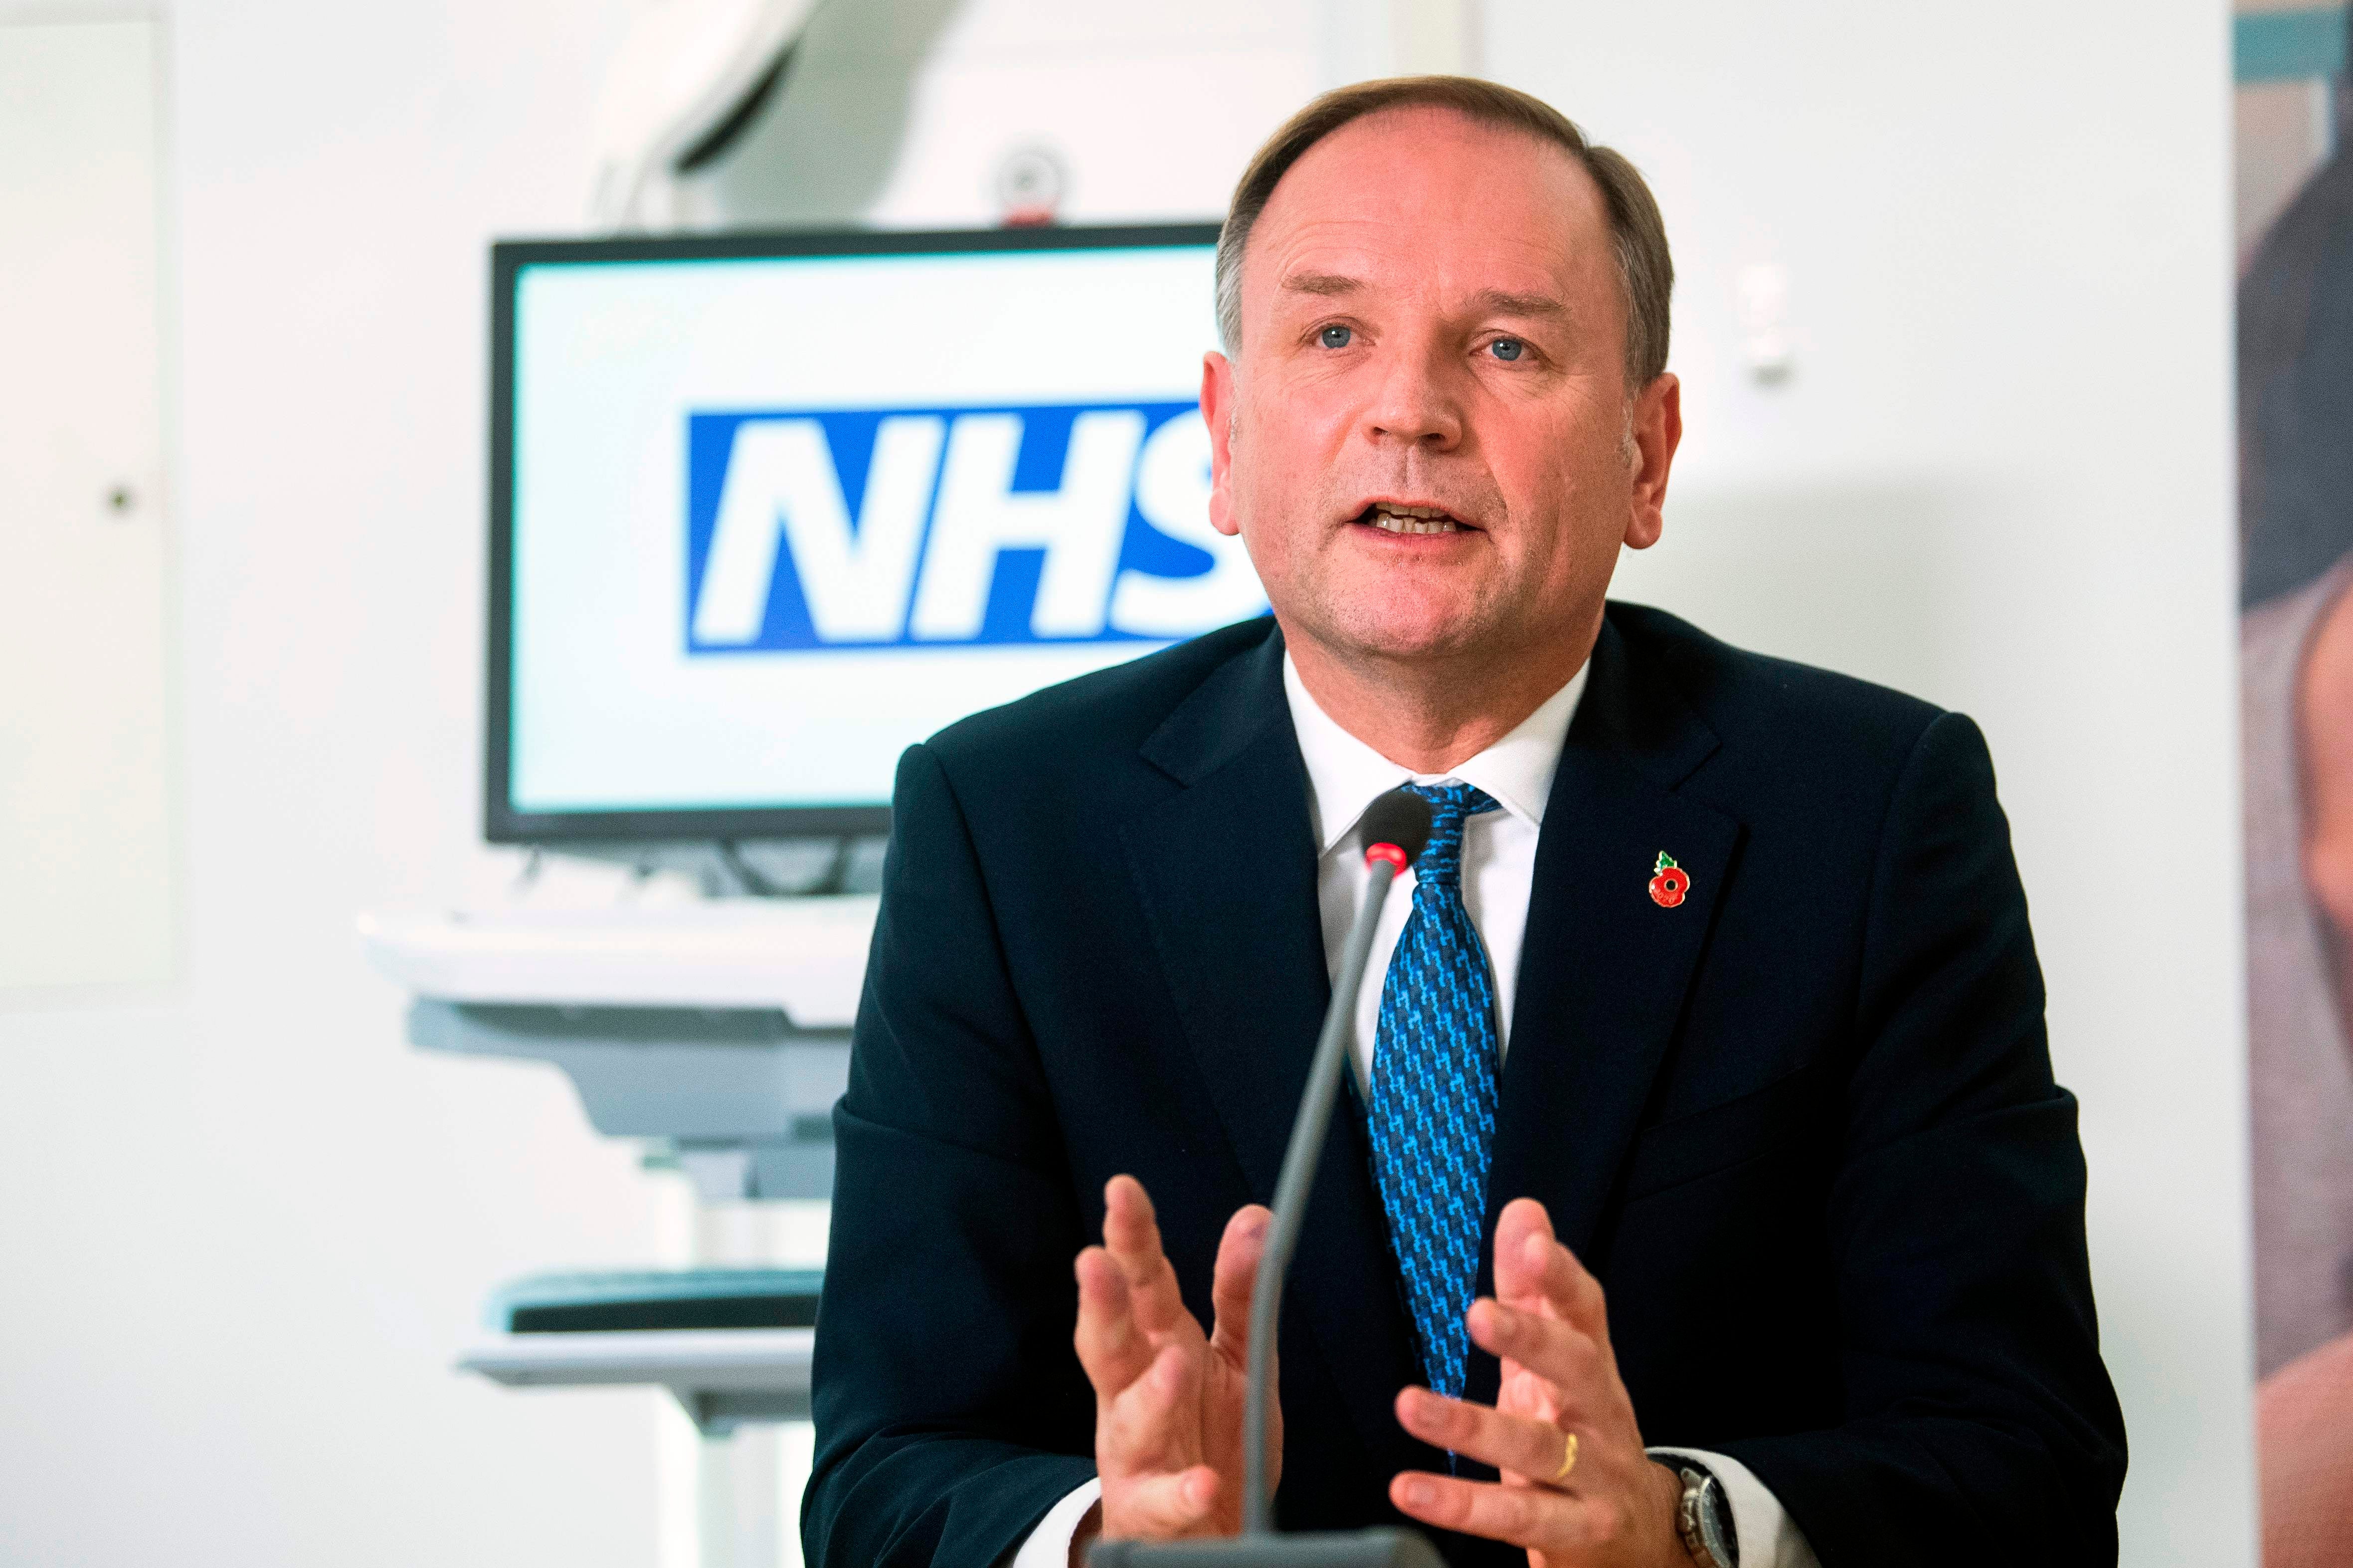 NHS chief executive Sir Simon Stevens holds a press conference at University College London Hospital